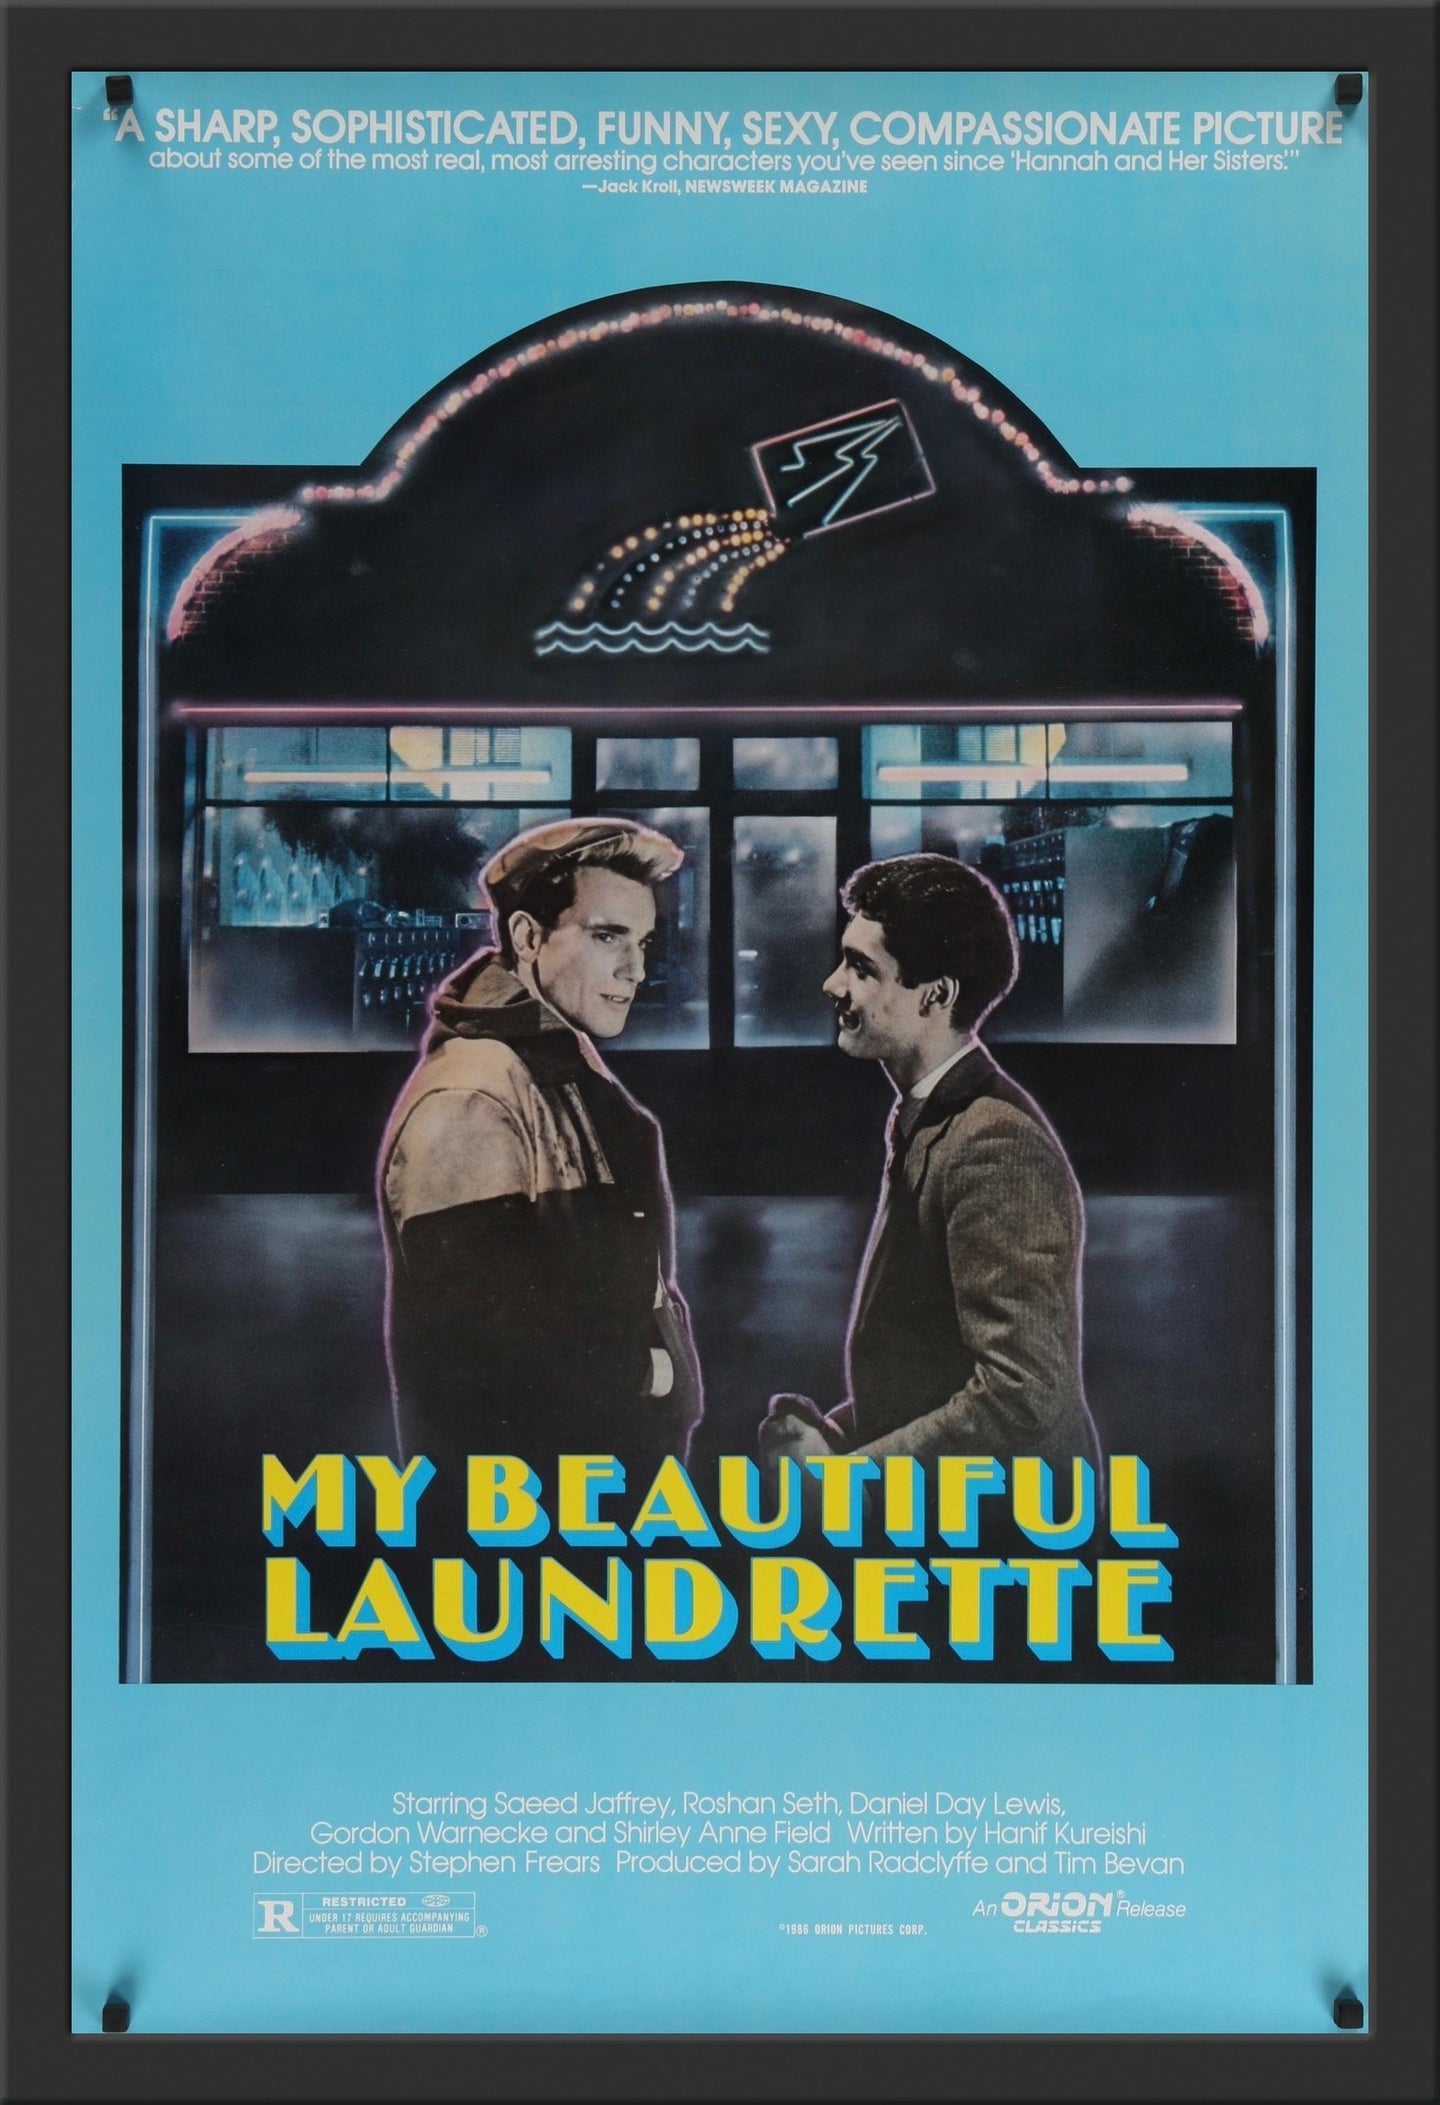 An original movie poster for the film My Beautiful Laundrette